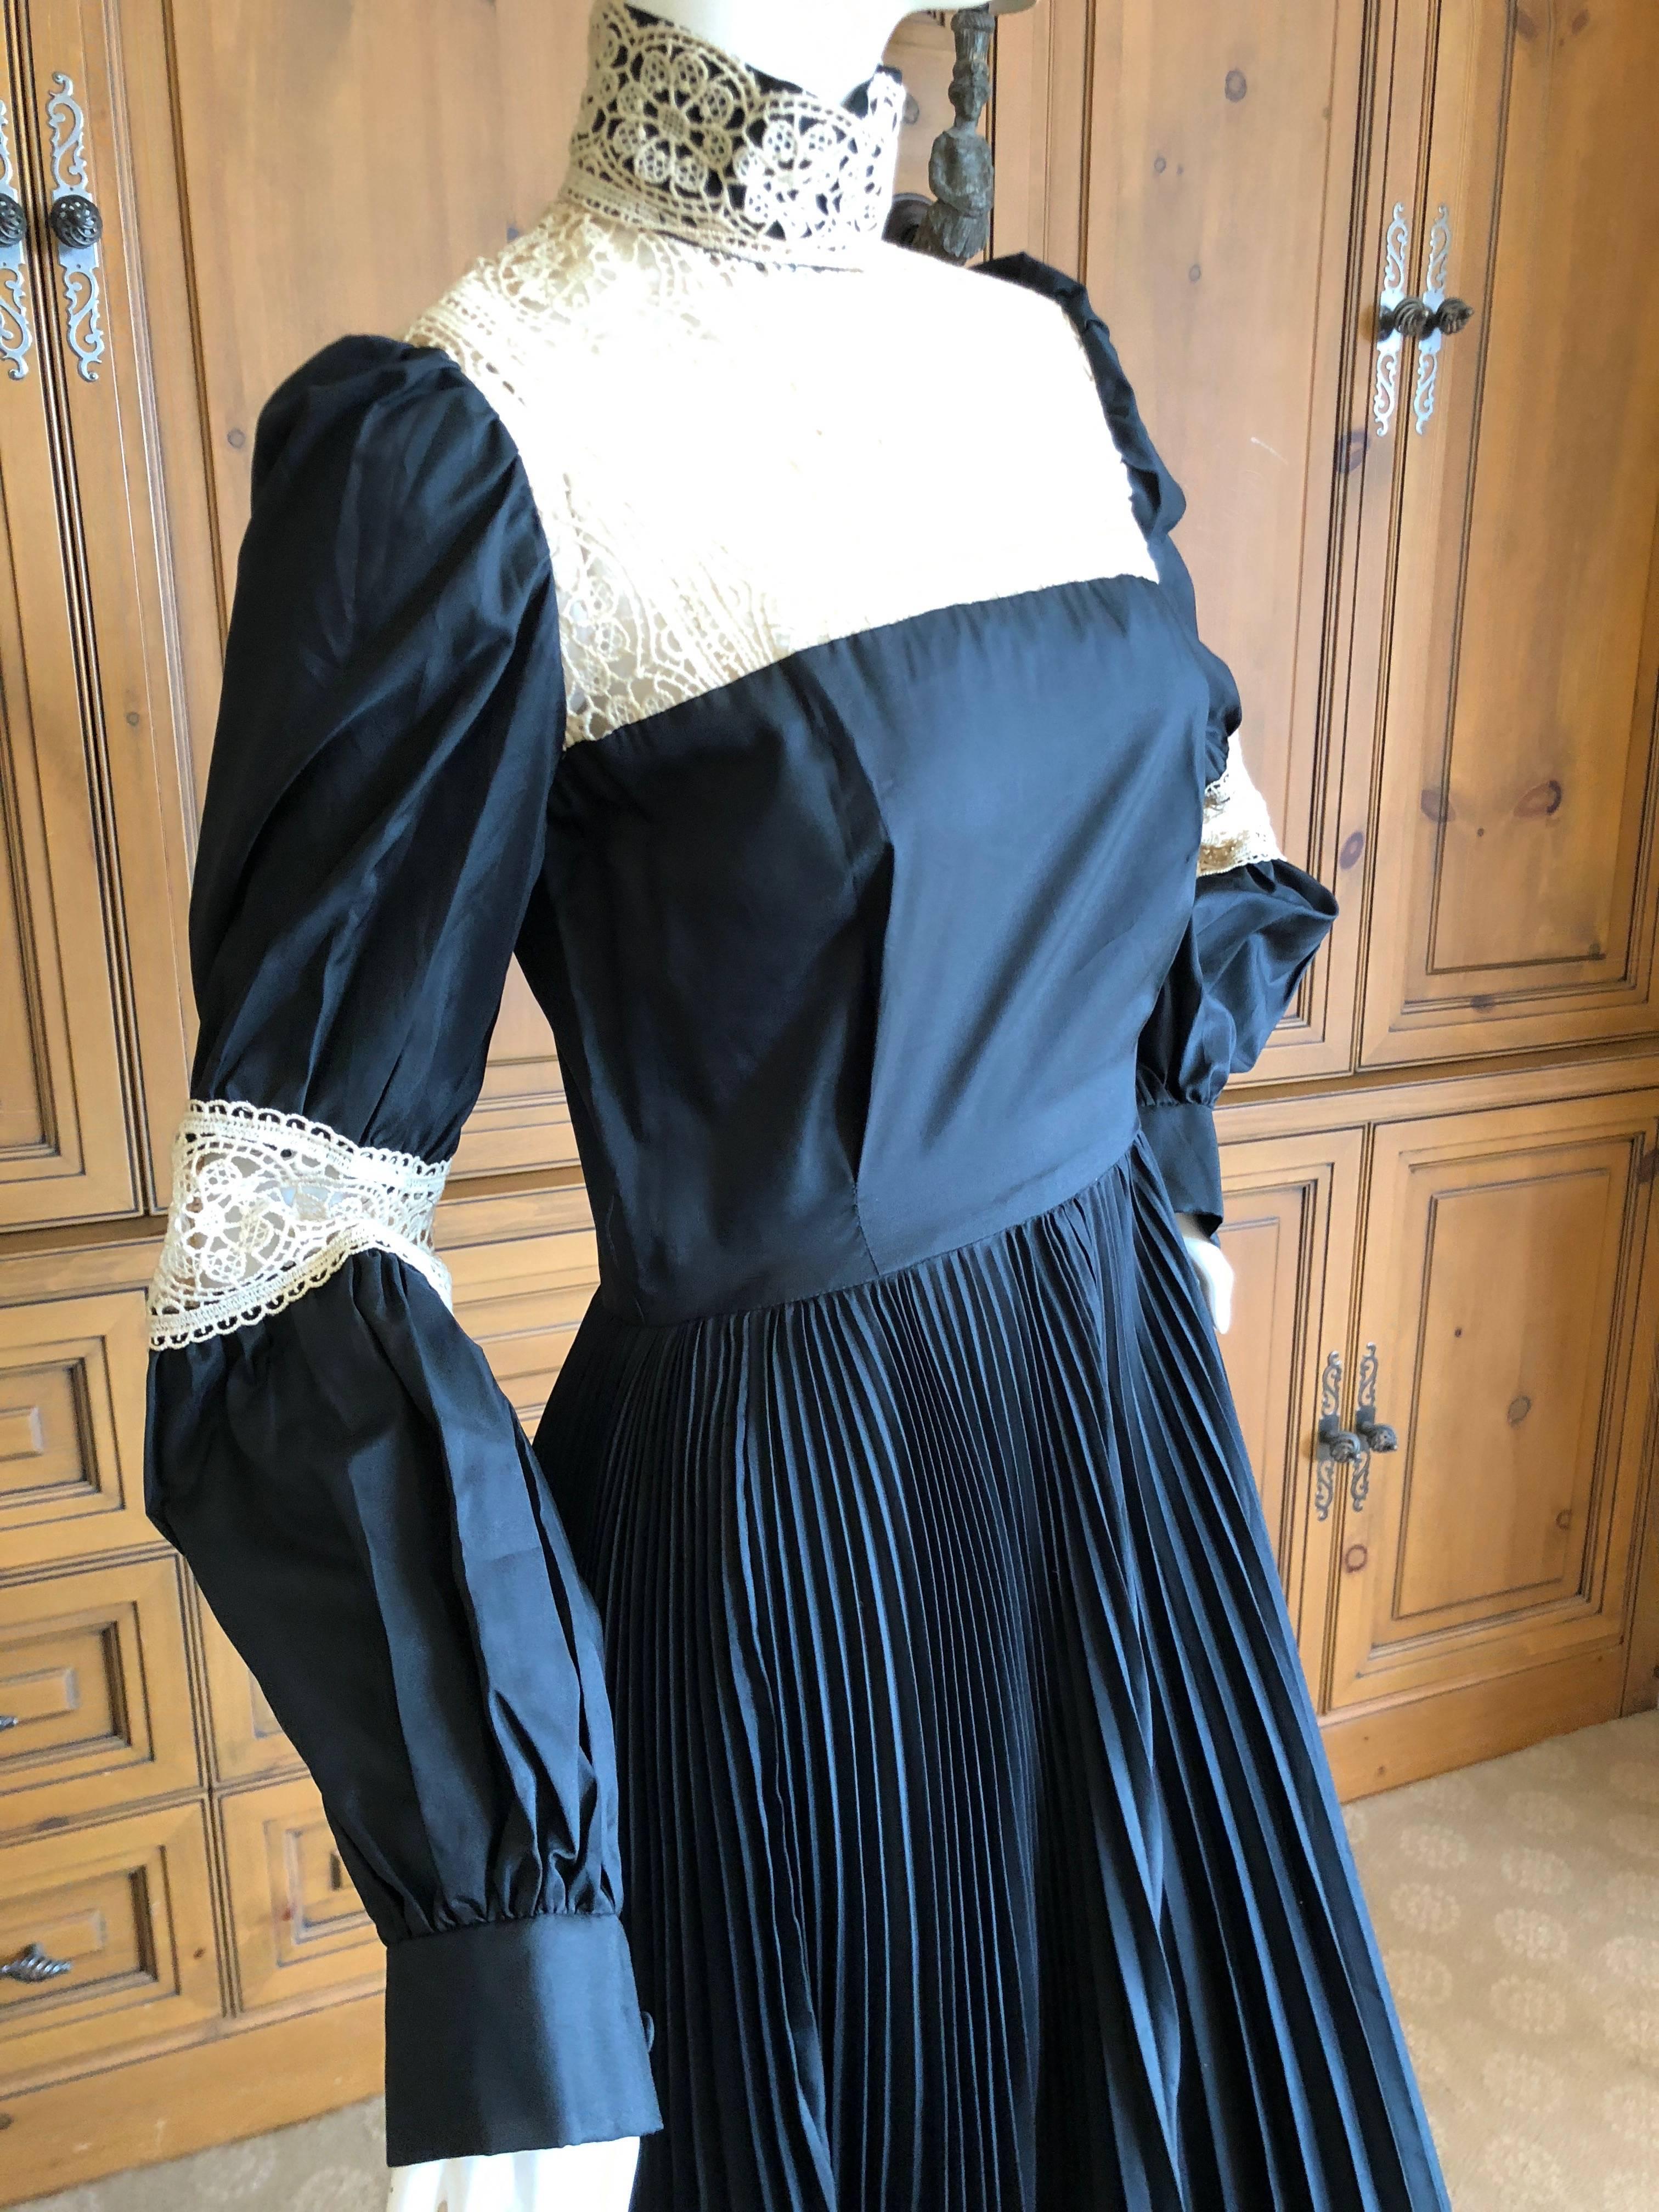 Cardinali Black Taffeta Lace Trimmed Peasant Prairie Dress, Fall 1972 In Good Condition For Sale In Cloverdale, CA